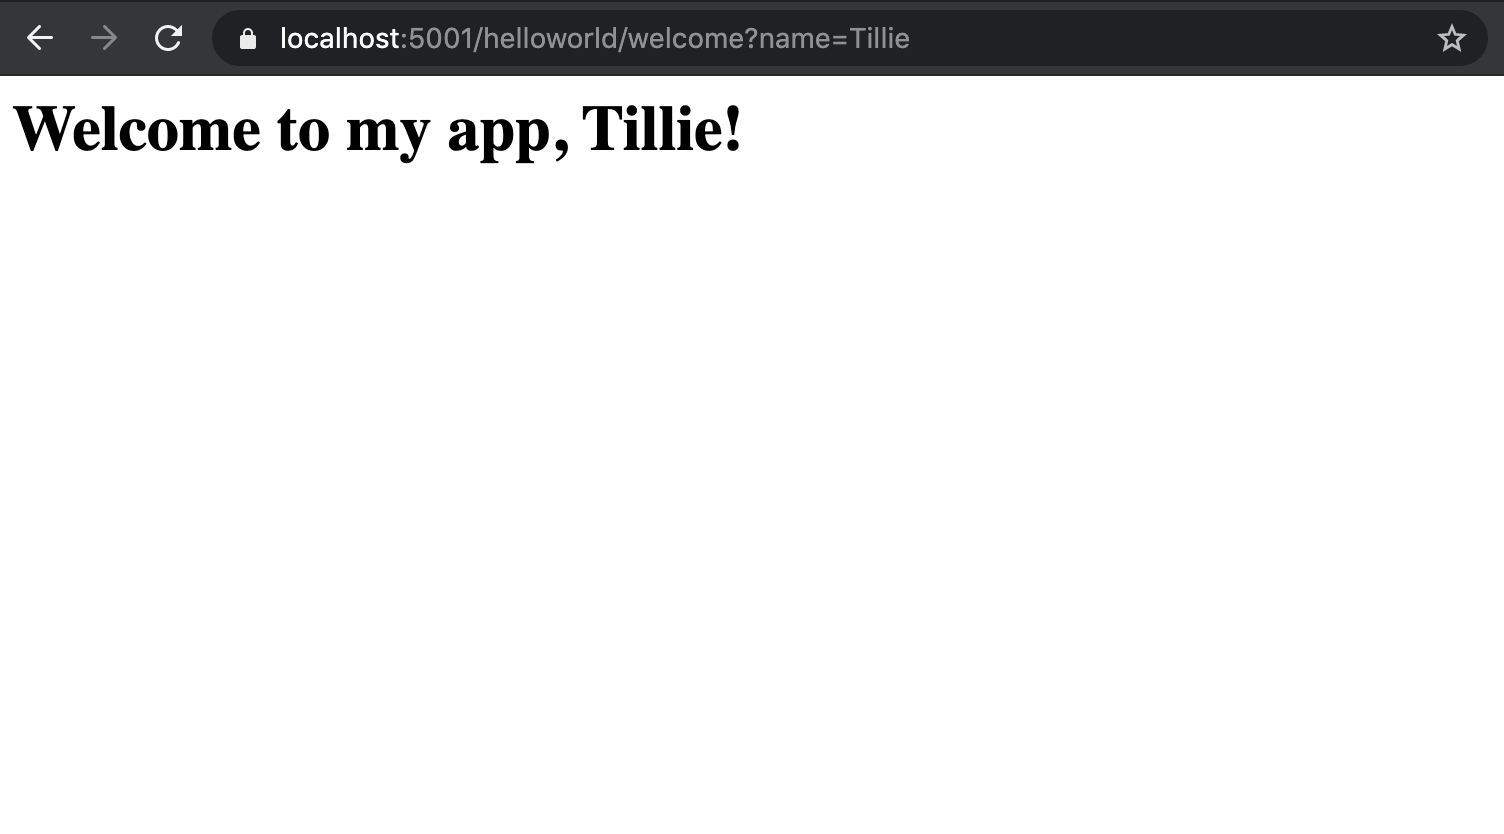 Simple webpage displaying welcome to my app, Tillie